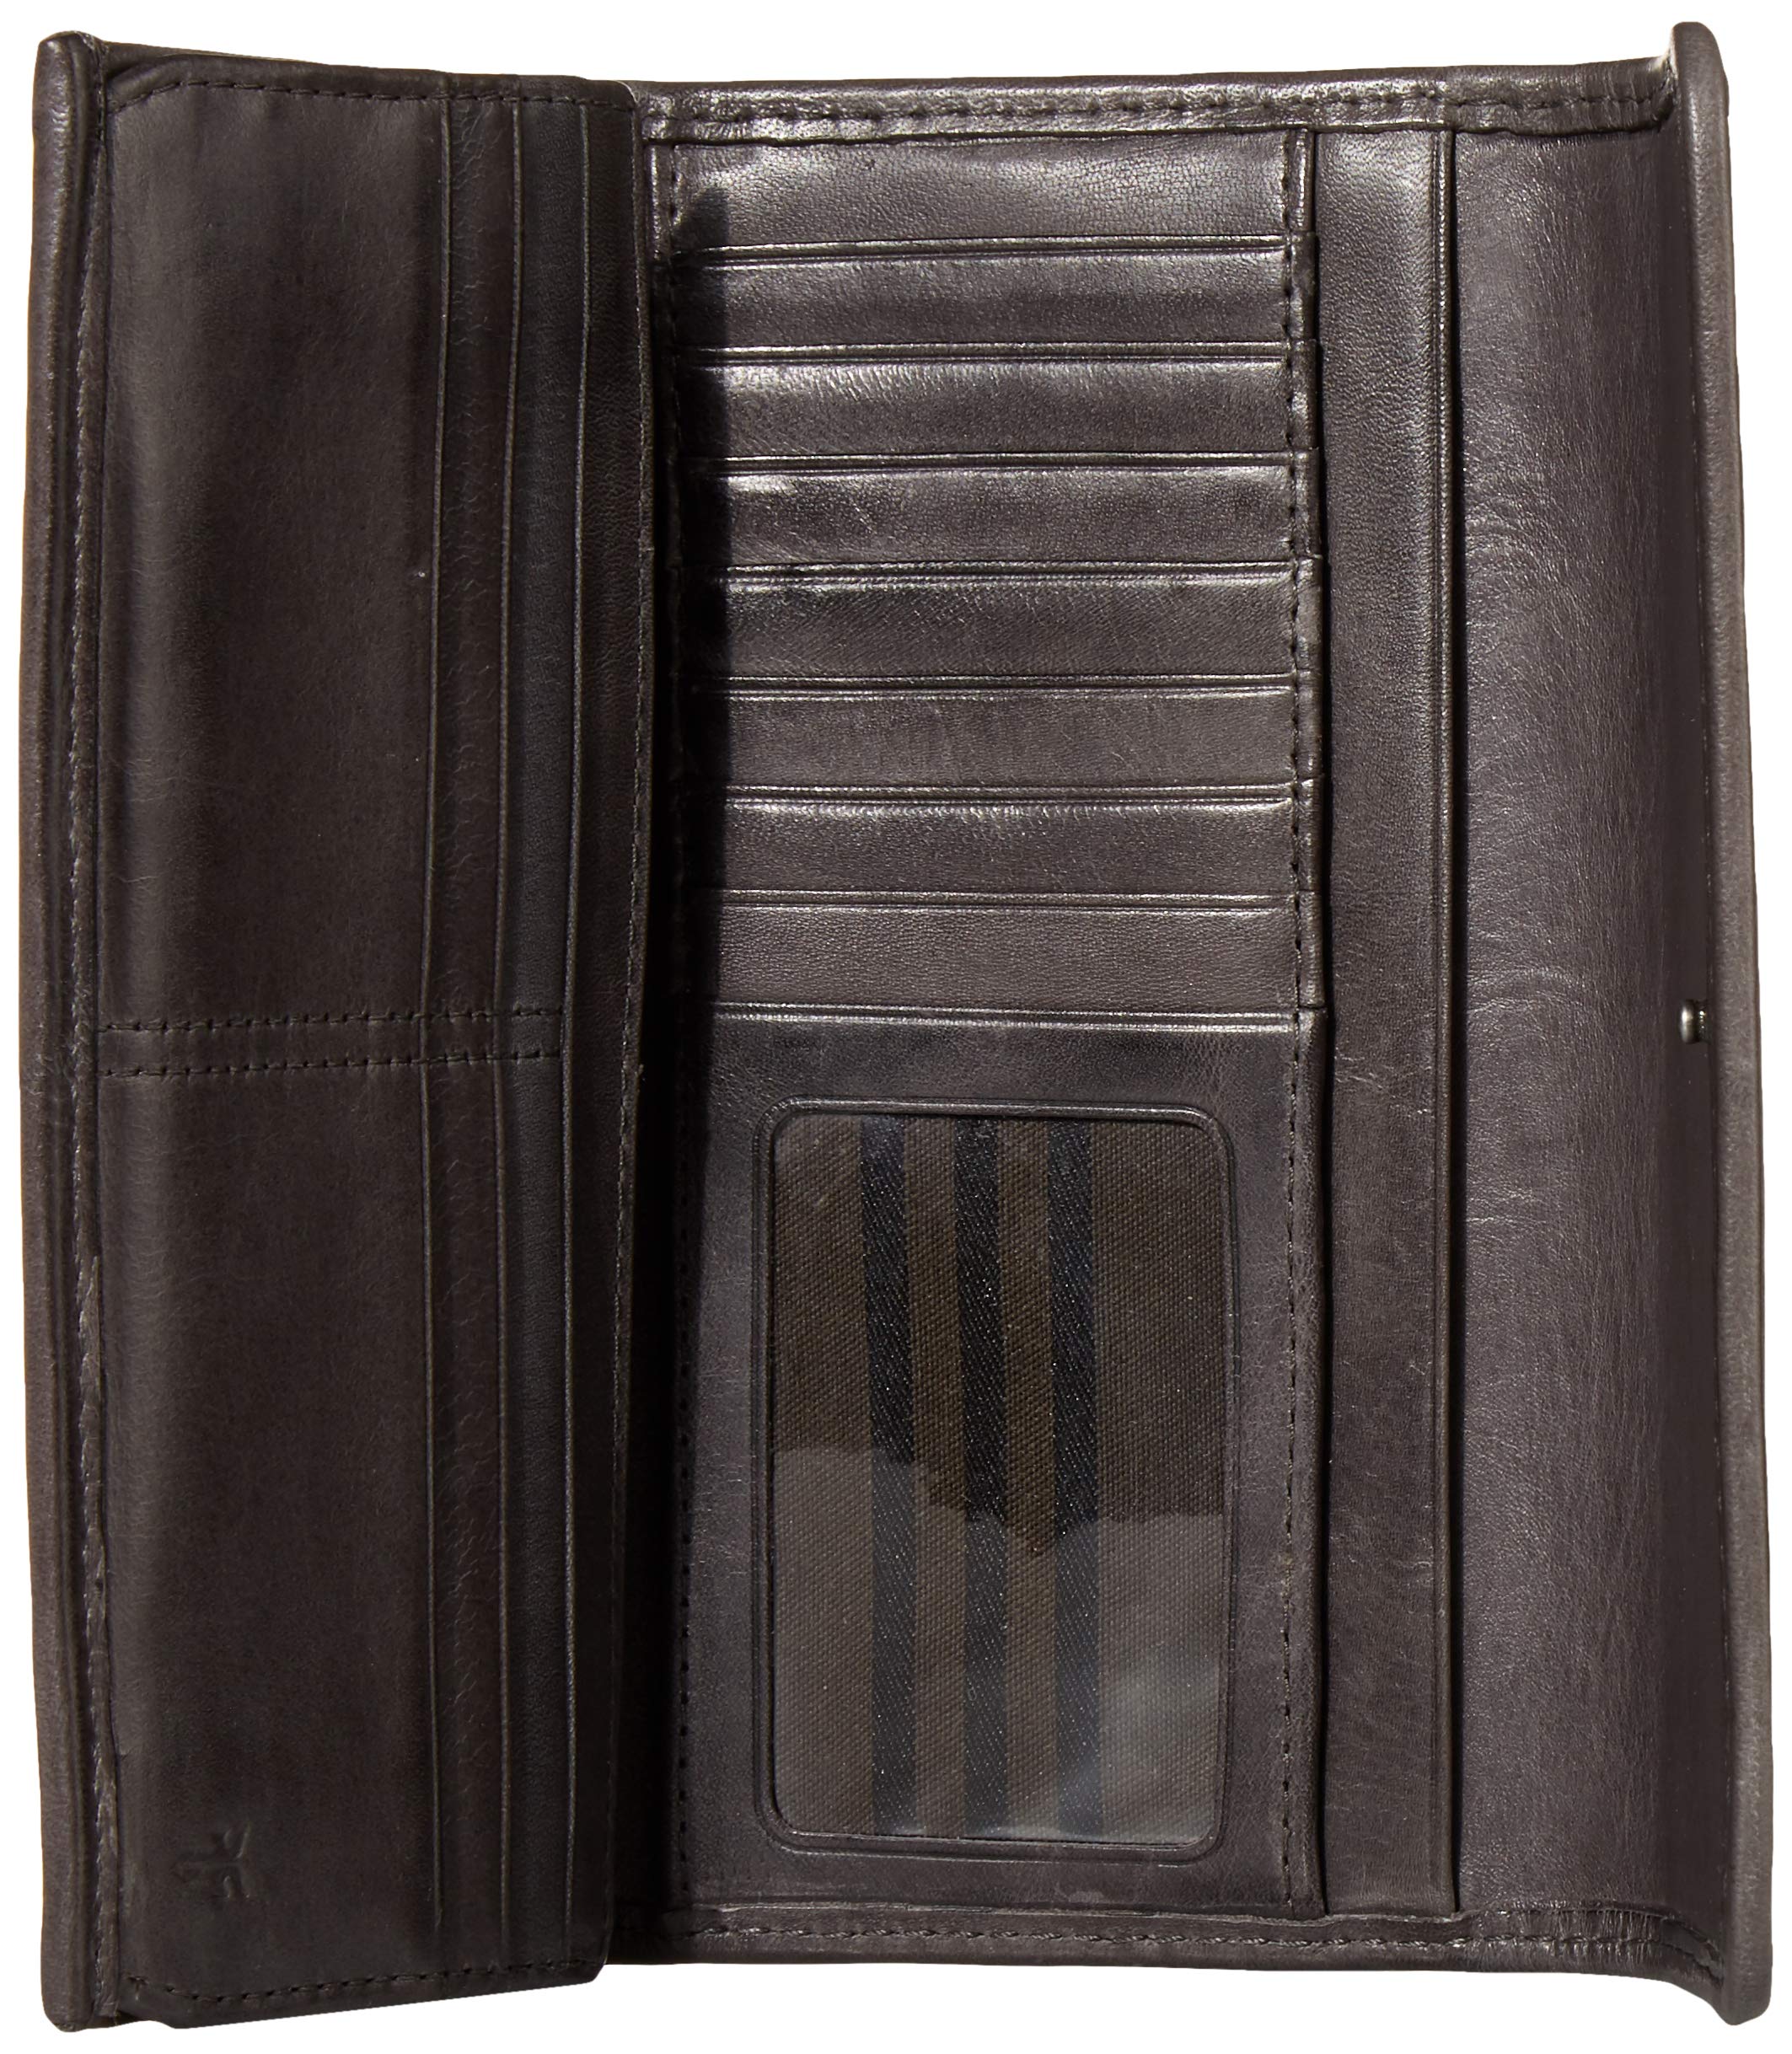 FRYE Melissa Continental Snap Leather Wallet